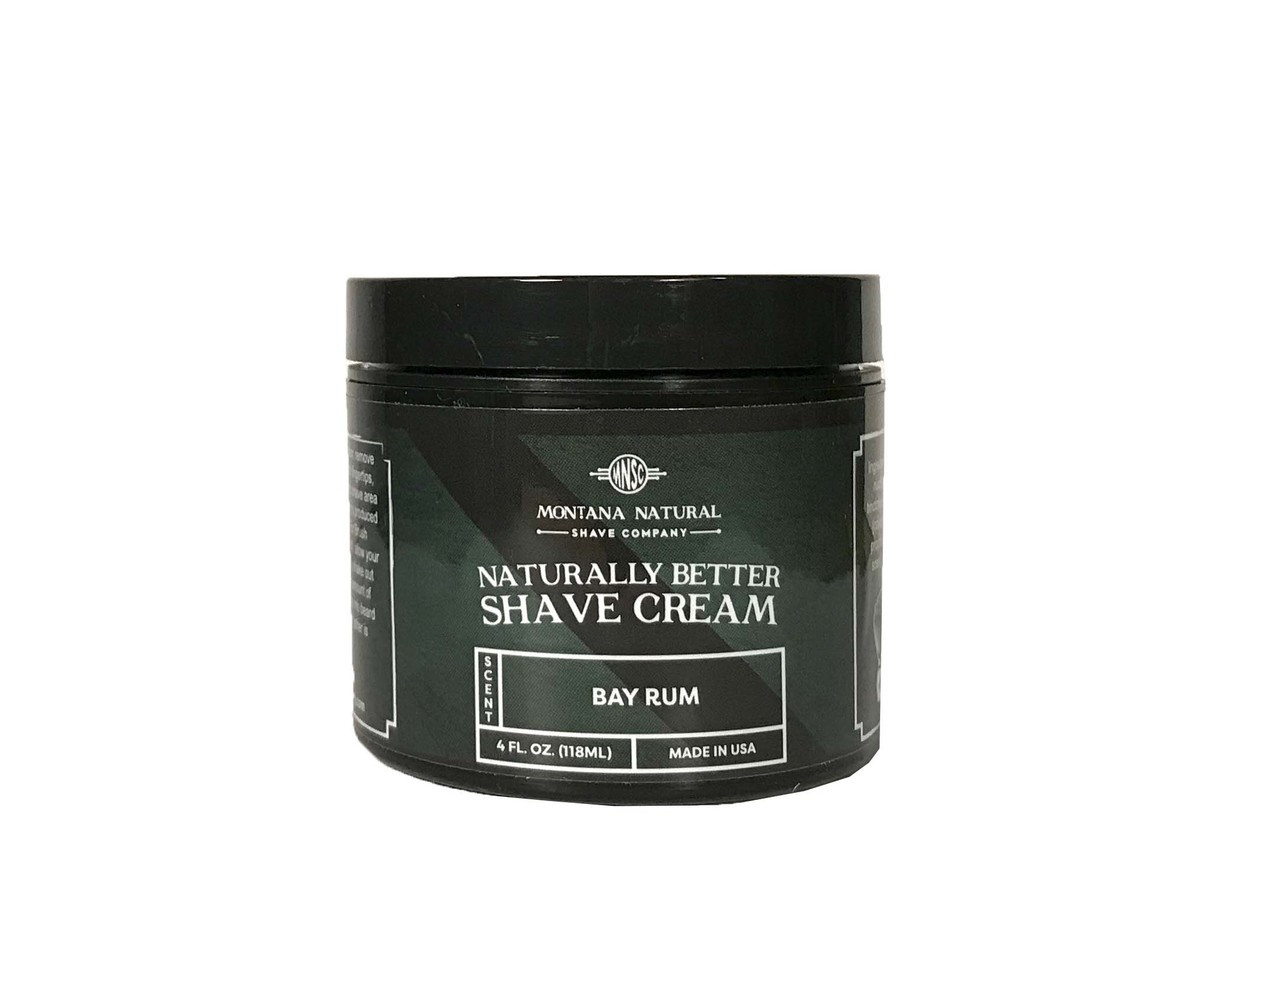 Montana Natural Shave Company | Bay Rum Shave Cream for a Naturally Better Shave Experience!